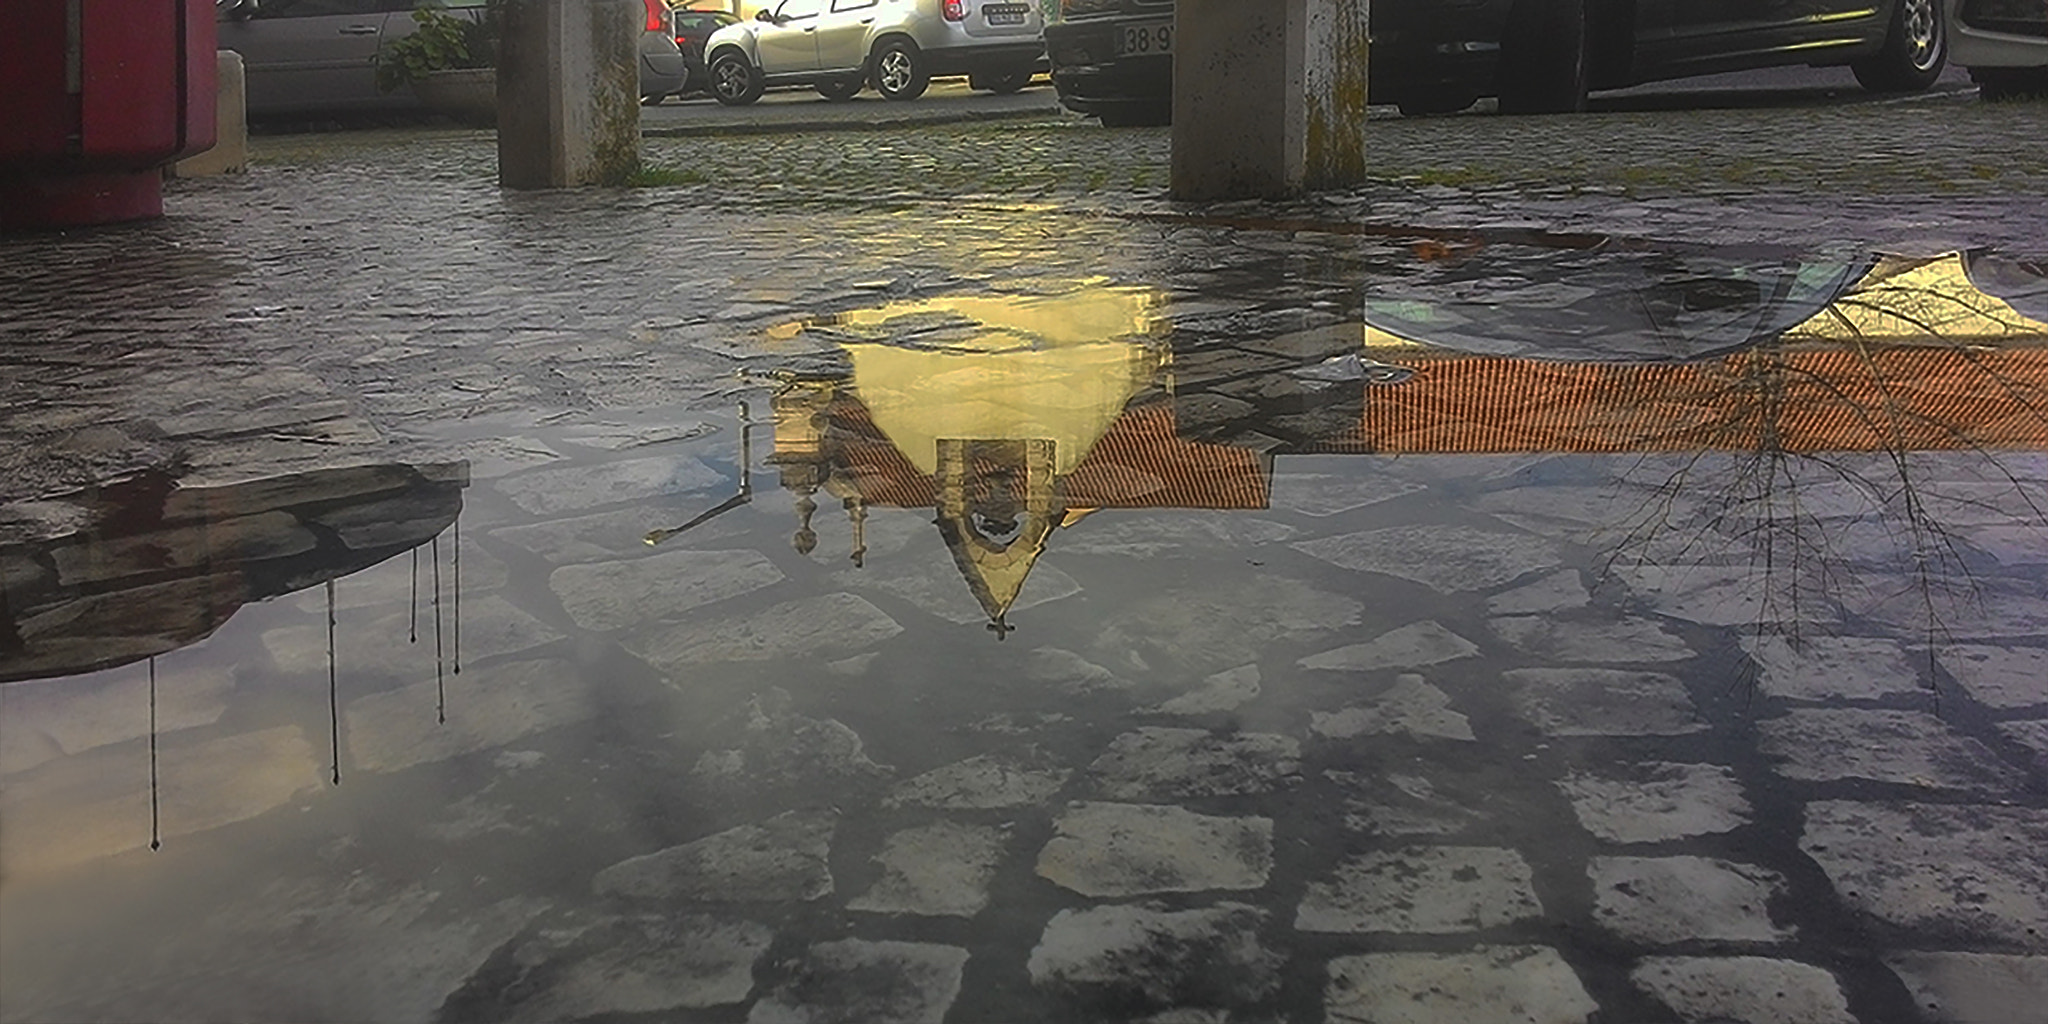 ASUS T00J sample photo. "reflectophotography - ... pic on the puddle" photography